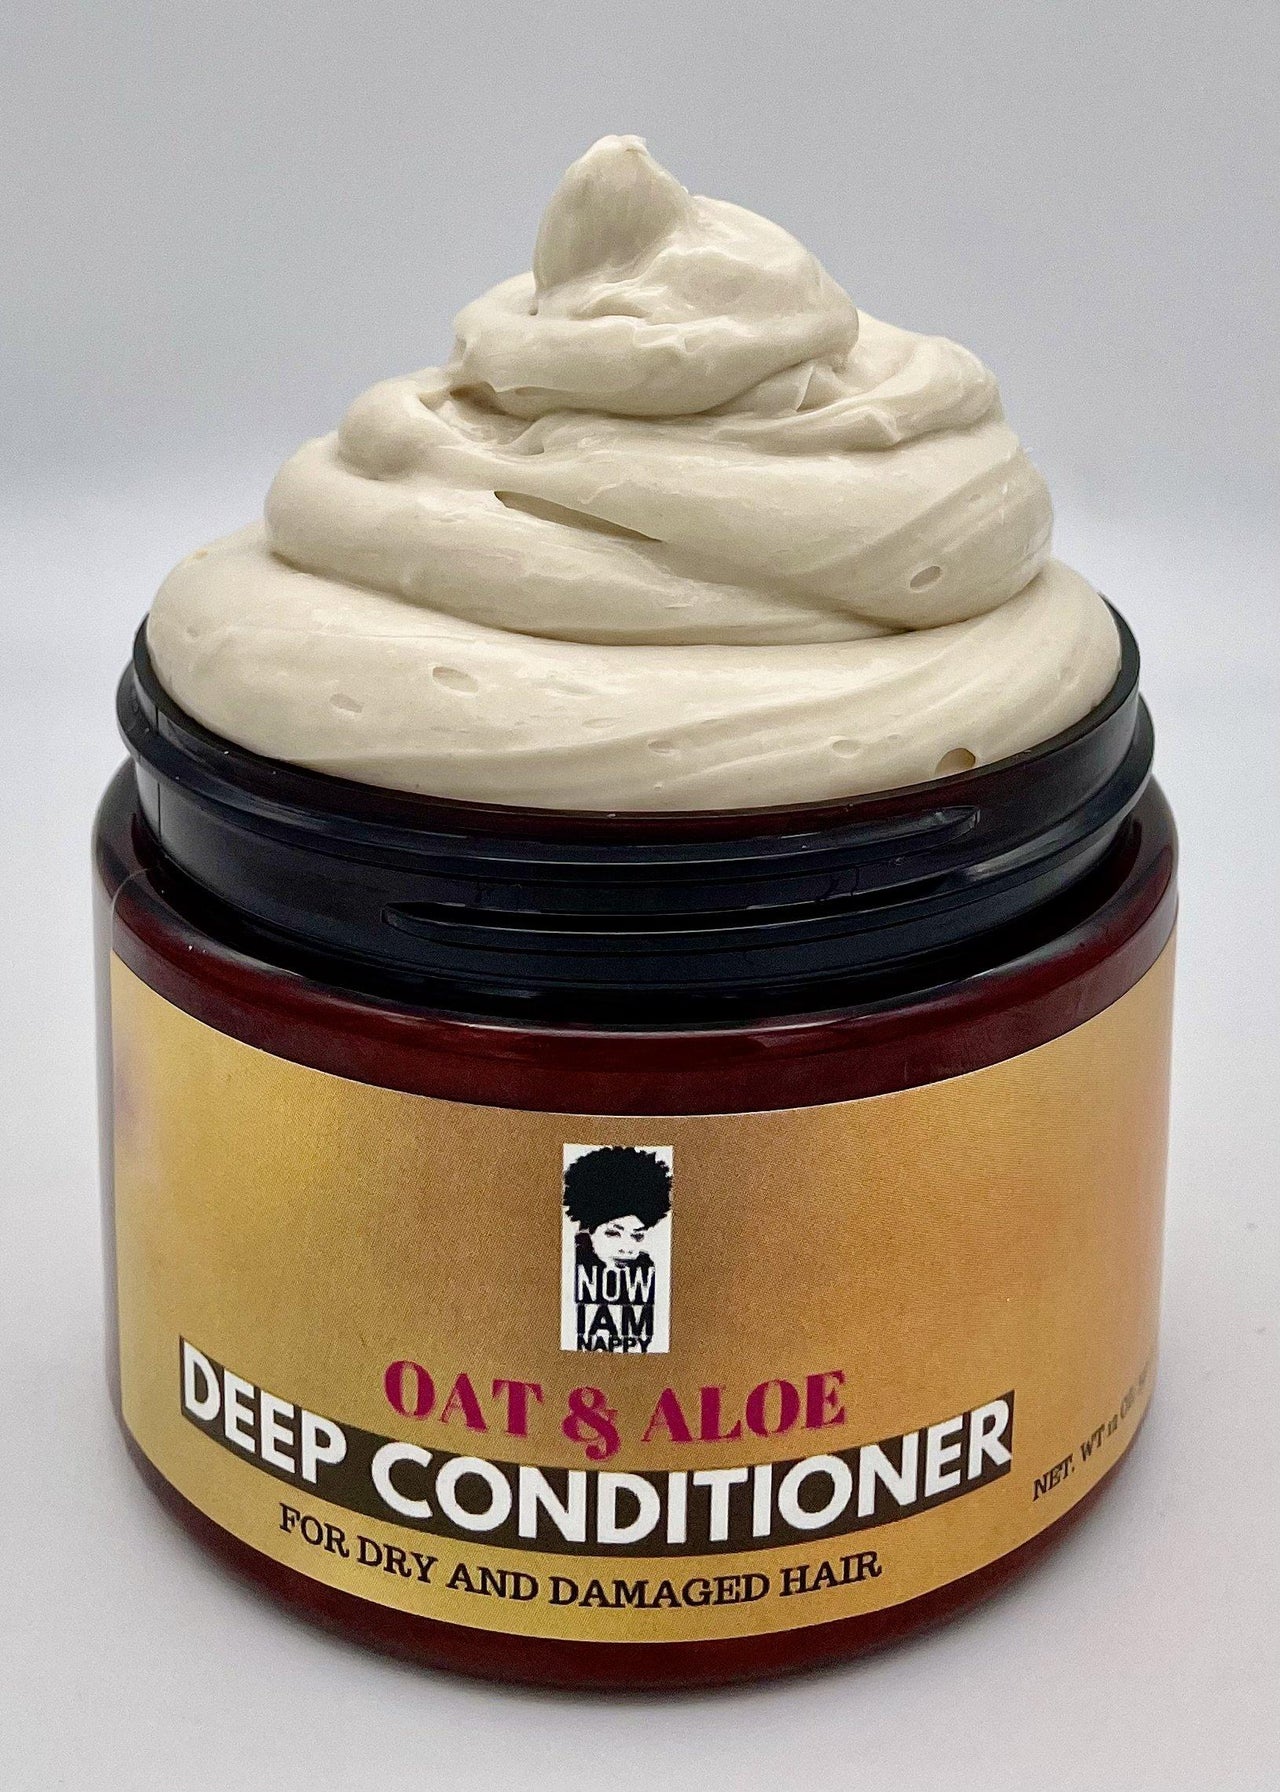 Oat and Aloe Deep Conditioner